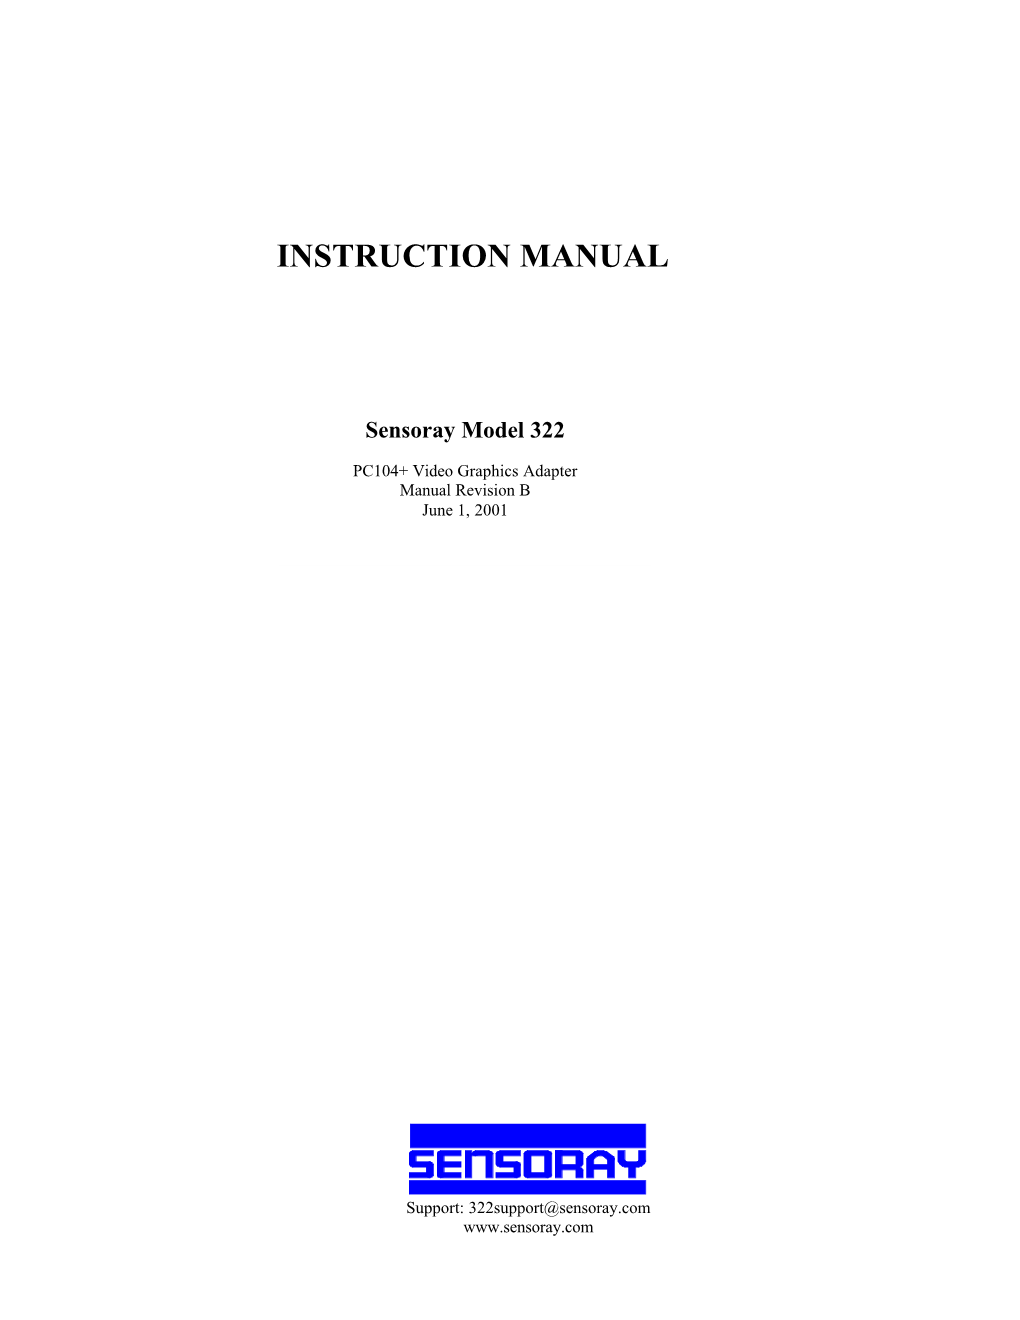 Model 322 Instruction Manual Page 3 5.1 OVERVIEW